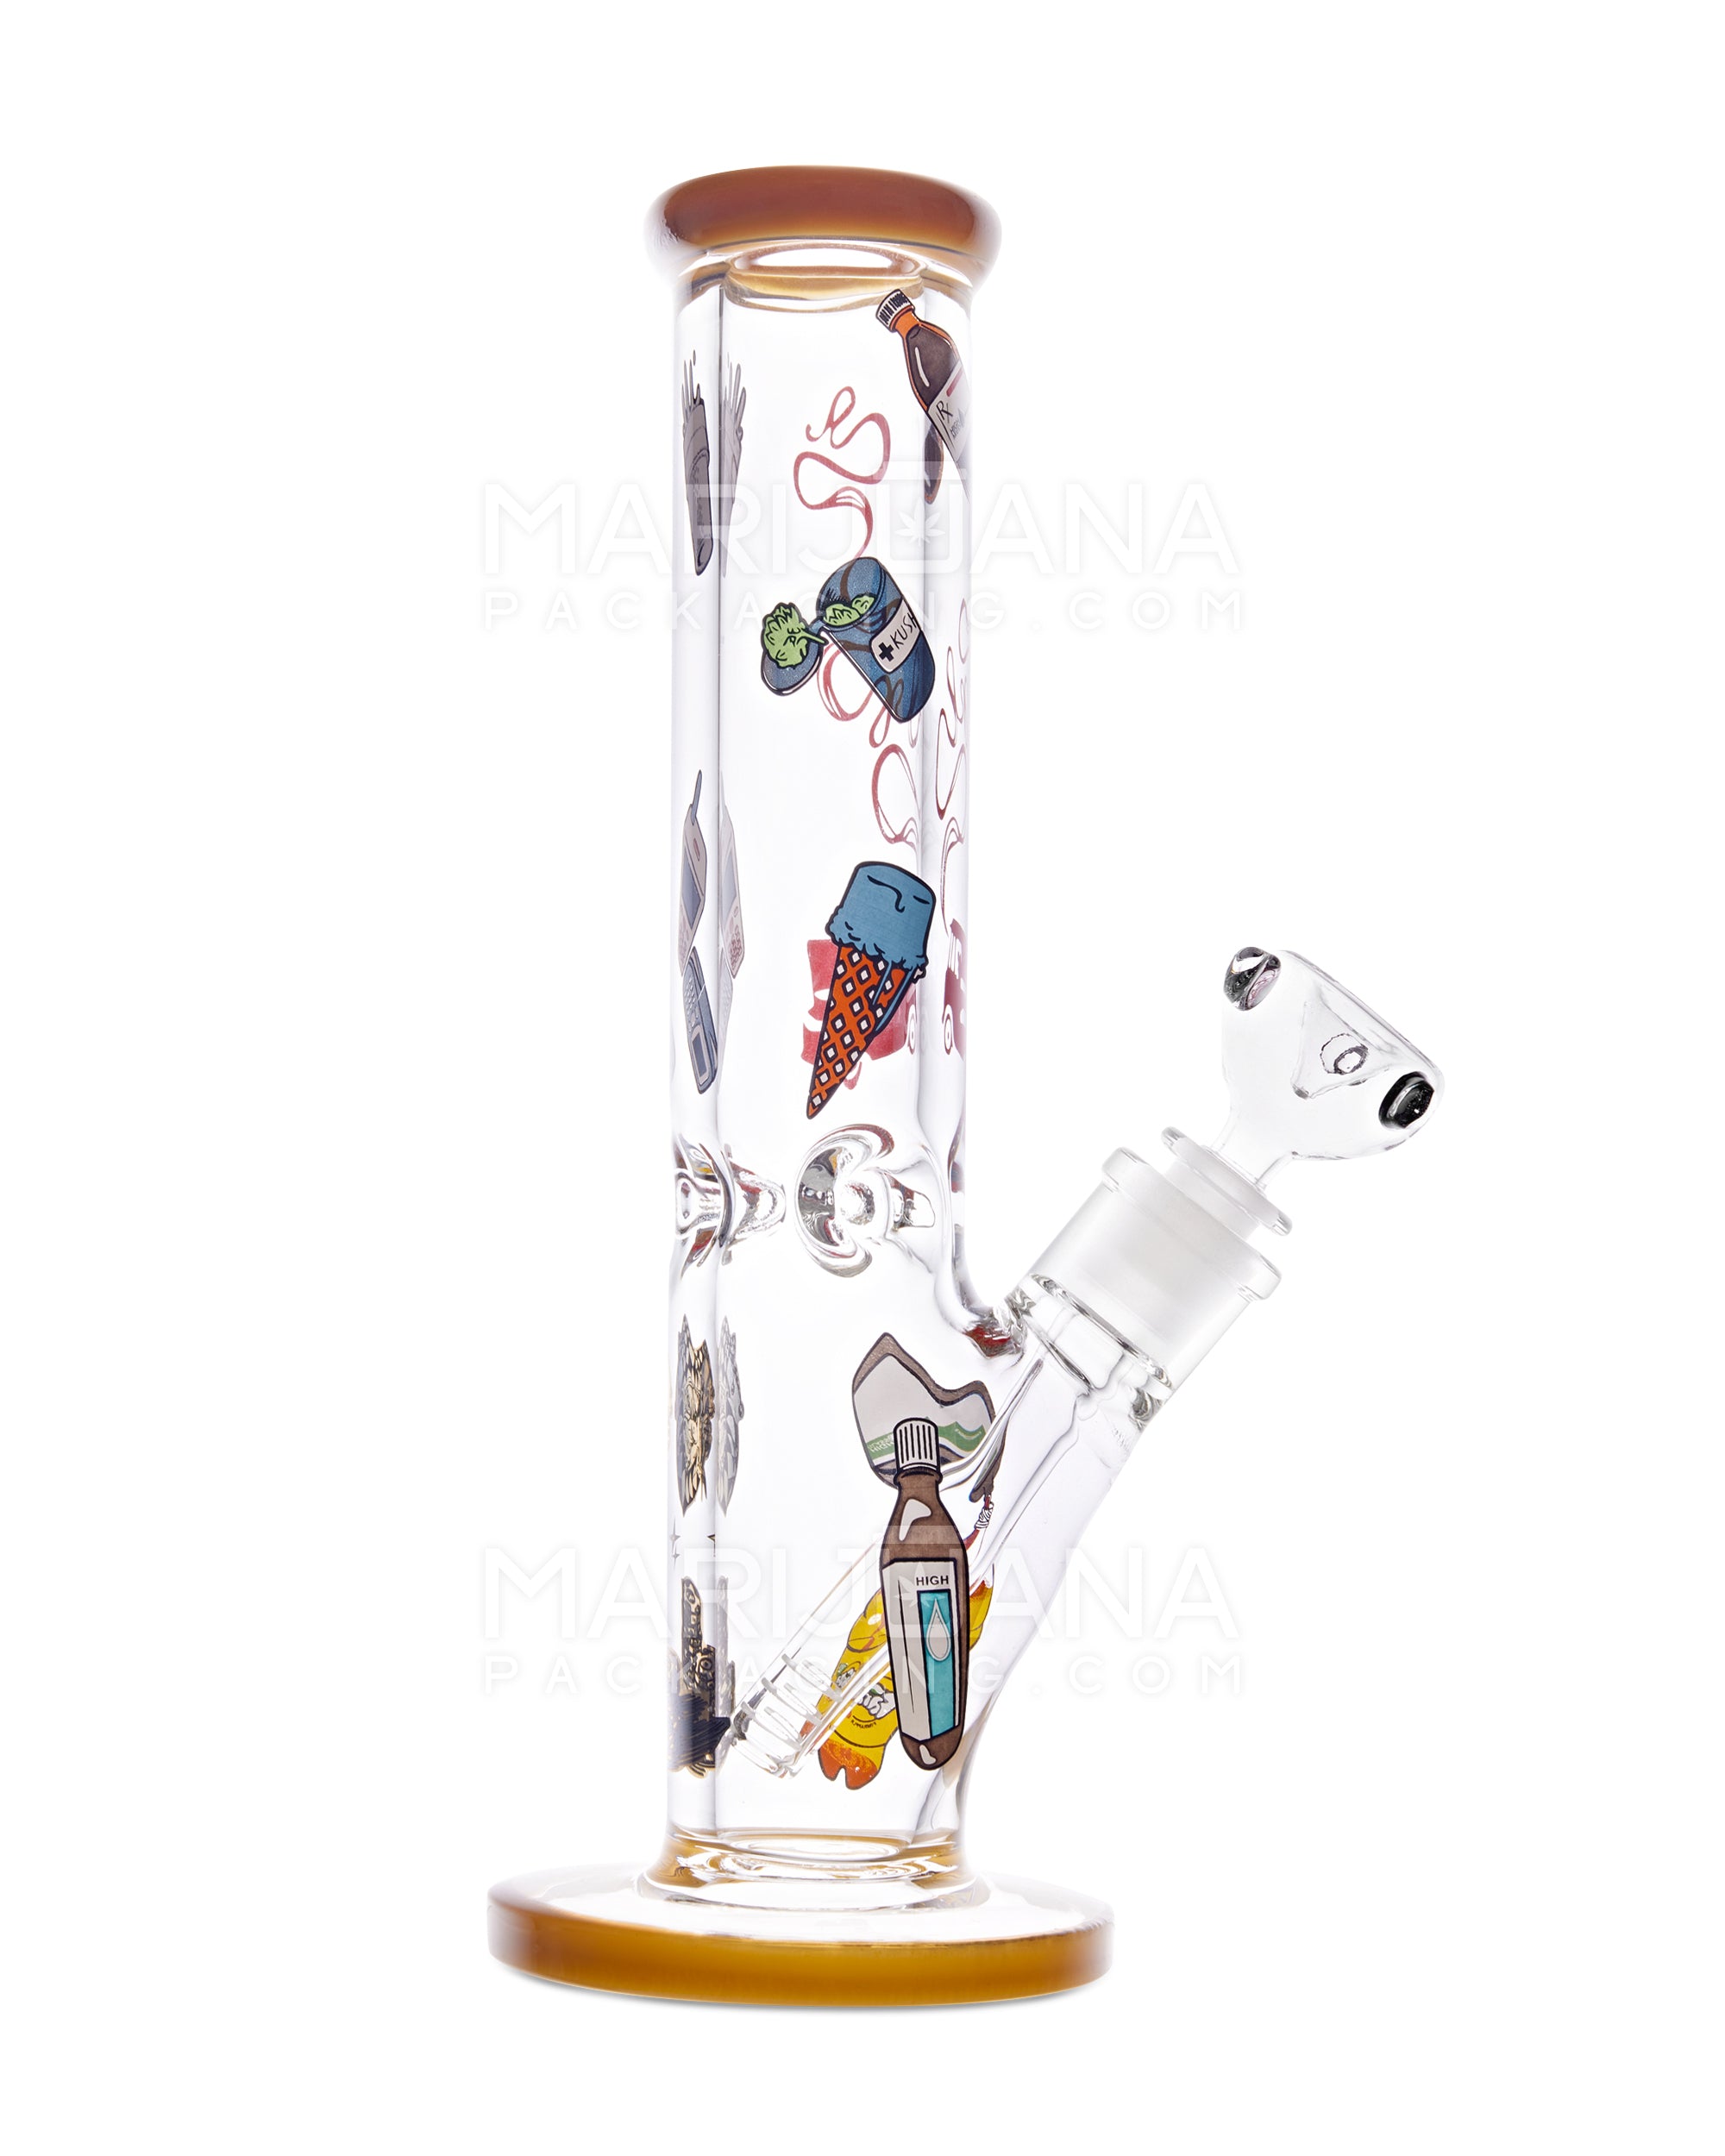 18mm Bongs For Dispensaries And Cannabis Head Shops